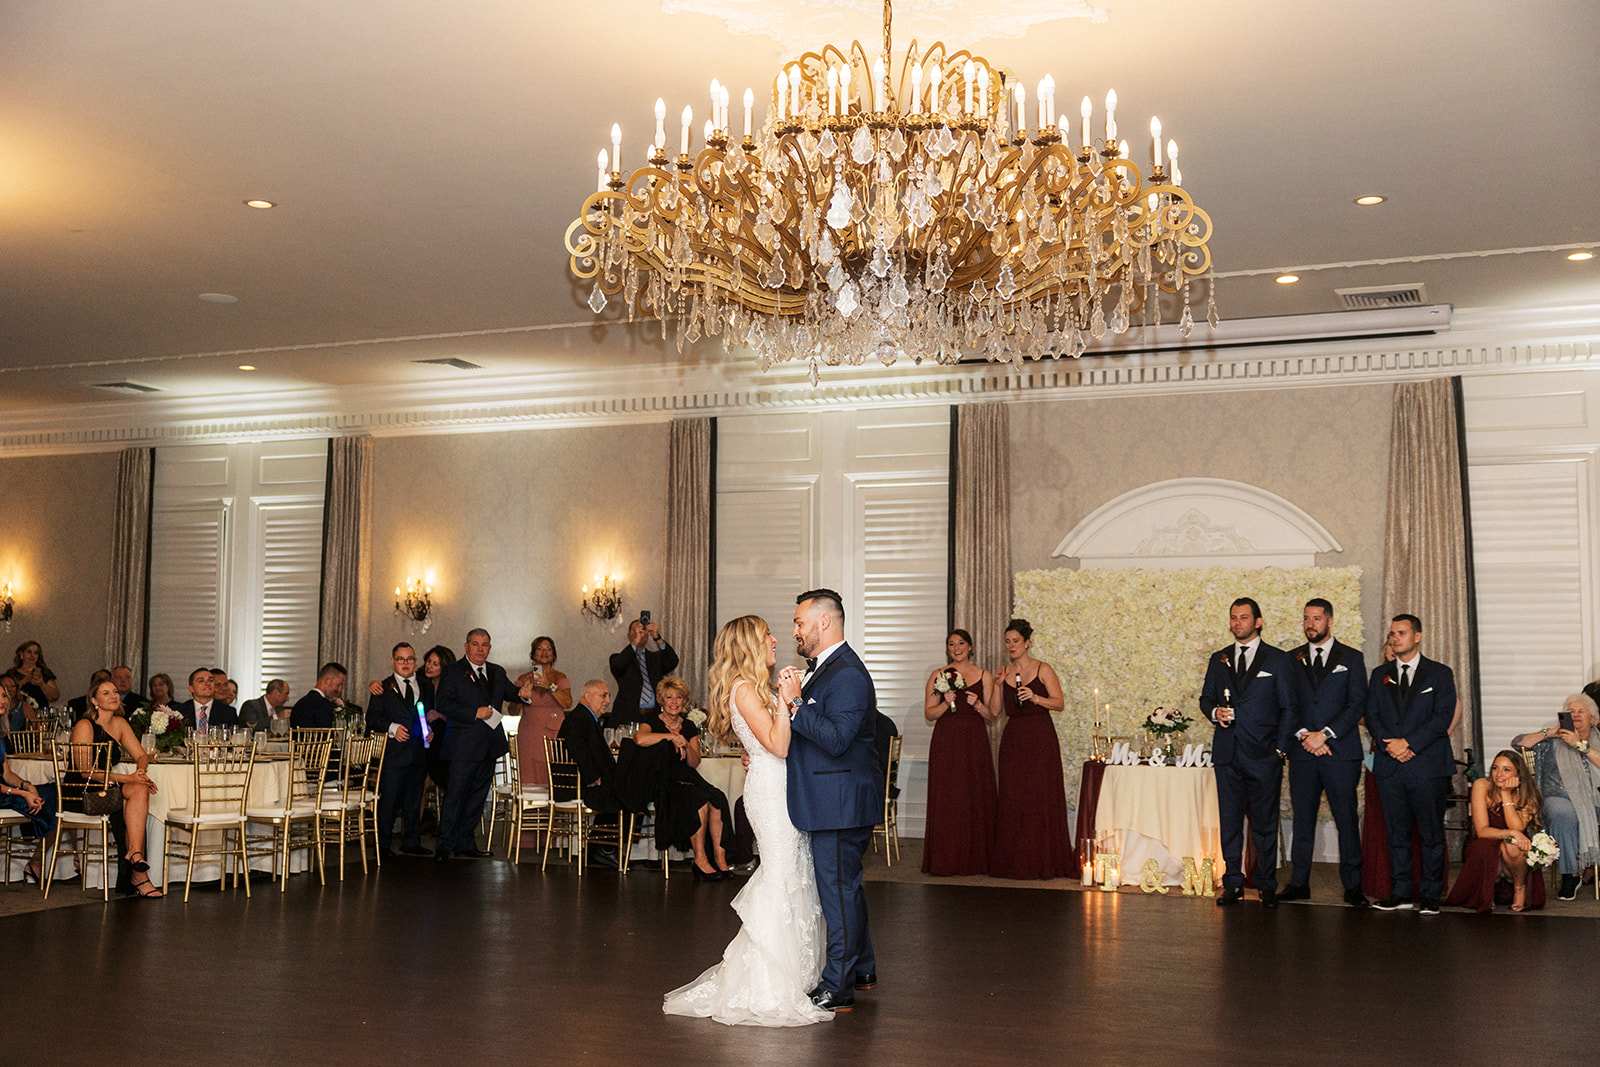 Newlyweds dance under a large chandelier surrounded by guests watching at the The Belle of Blue Bell reception venue